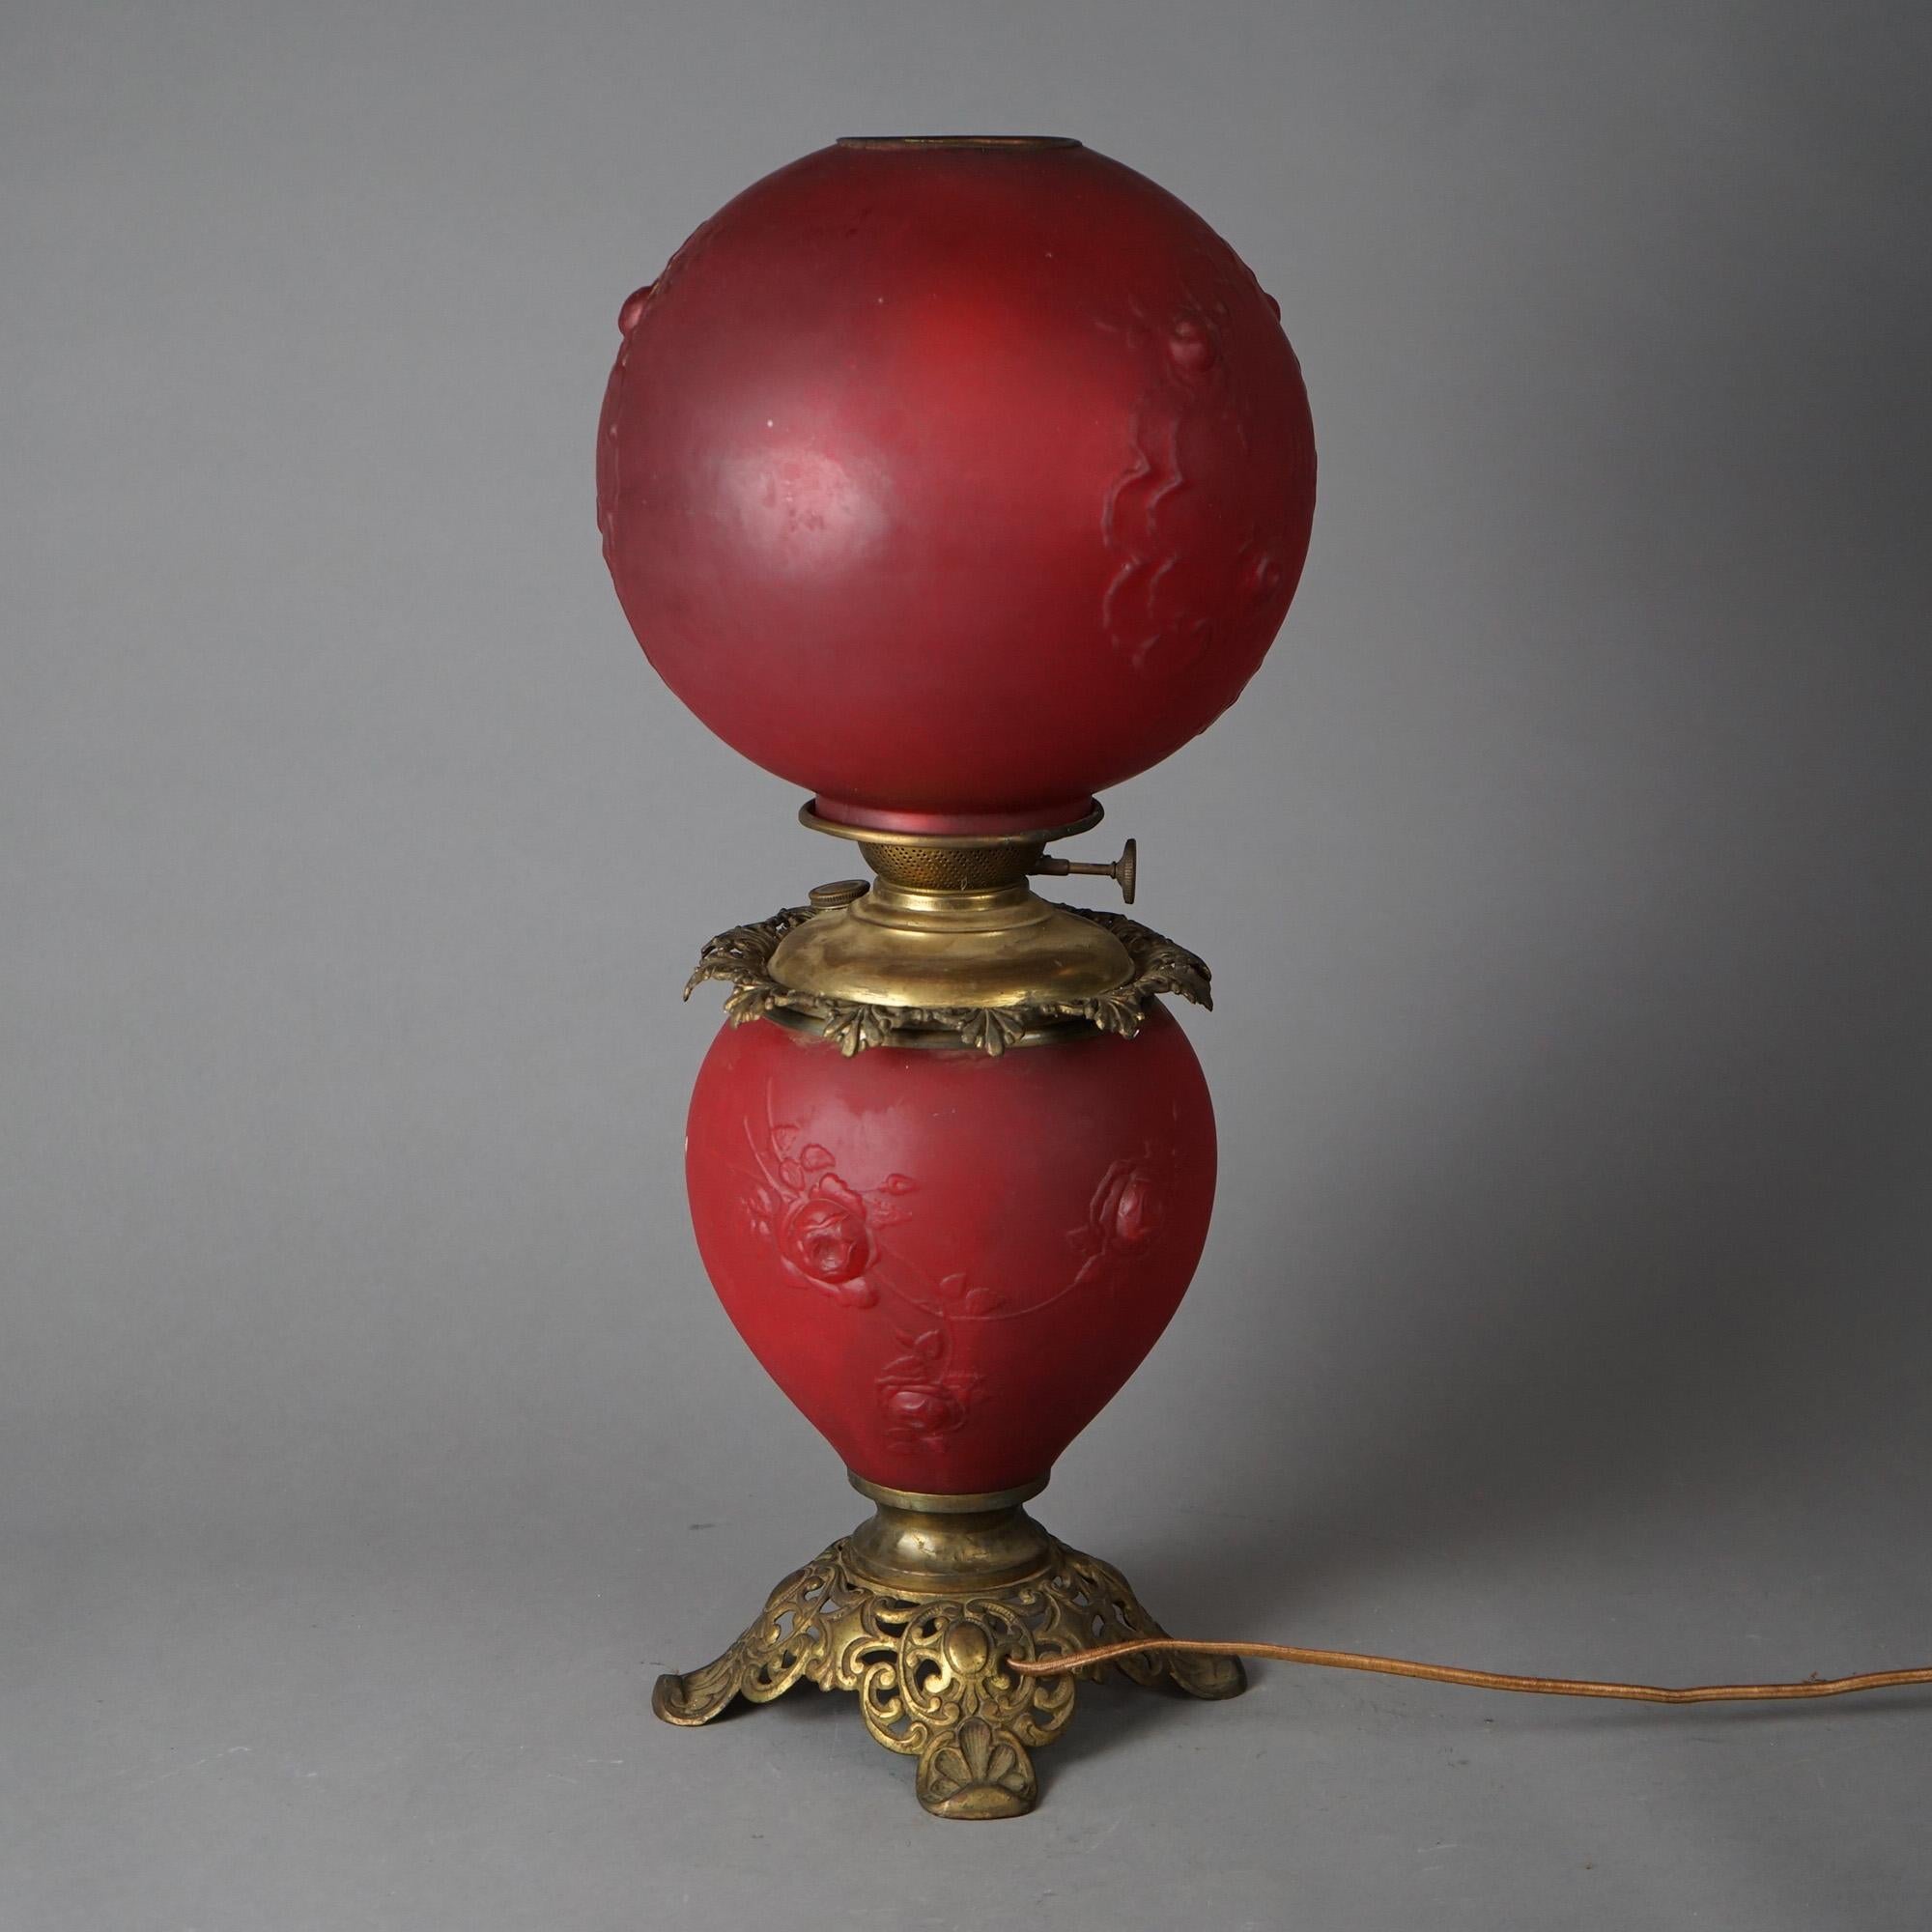 Antique Brass & Cranberry Glass Gone With The Wind Floral Embossed Lamp c1890 For Sale 10